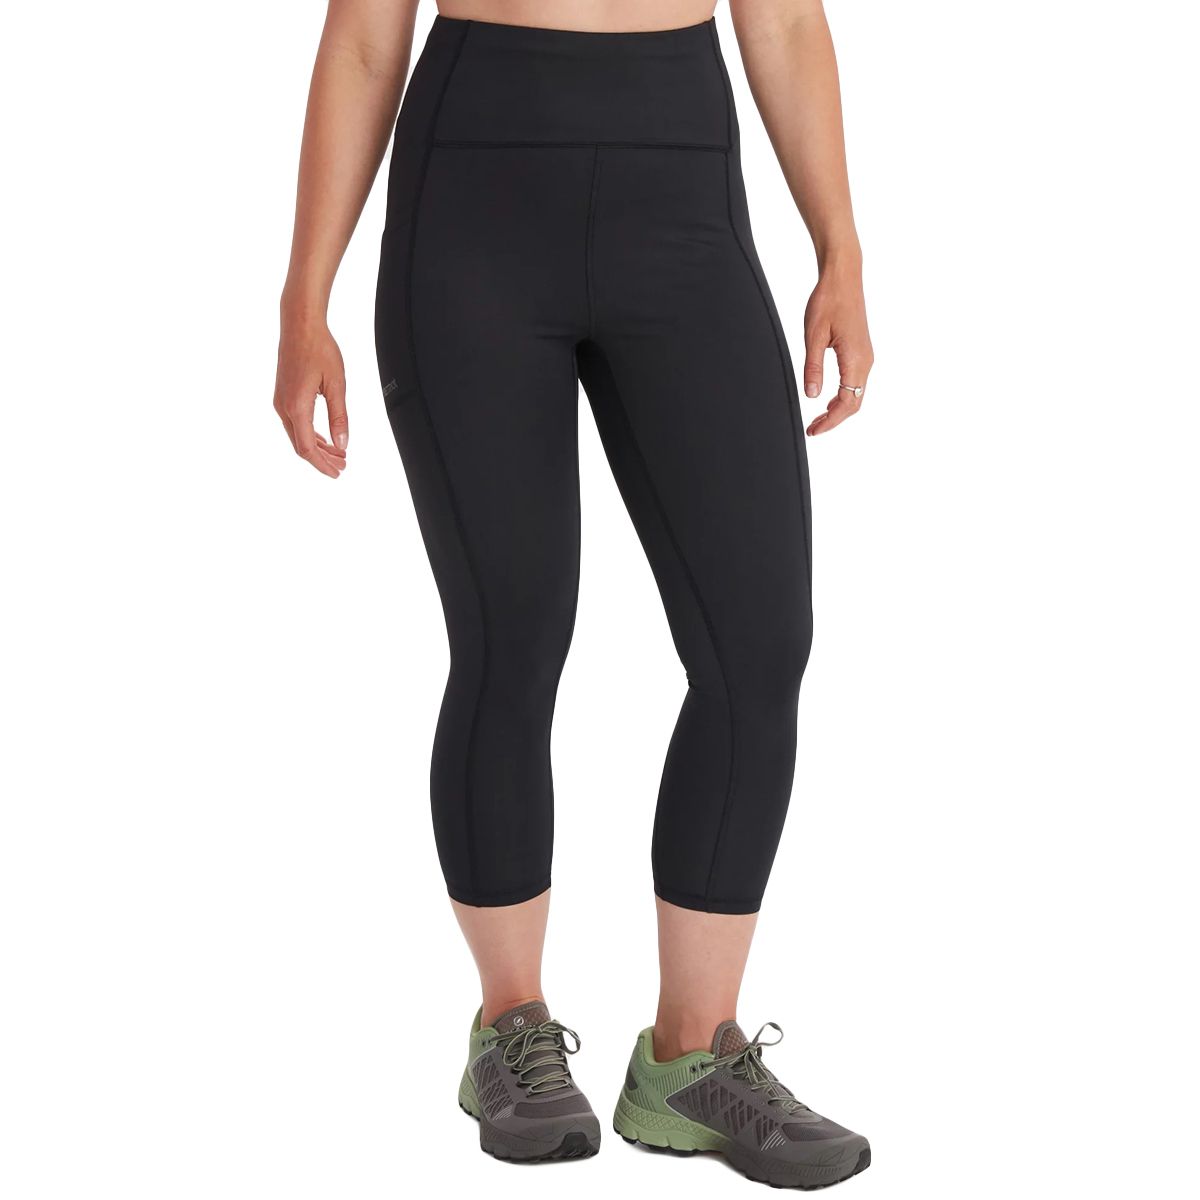 Eastern Mountain Sports EMS Leggings Womens Crop Hiking Athletic Workout  Gym